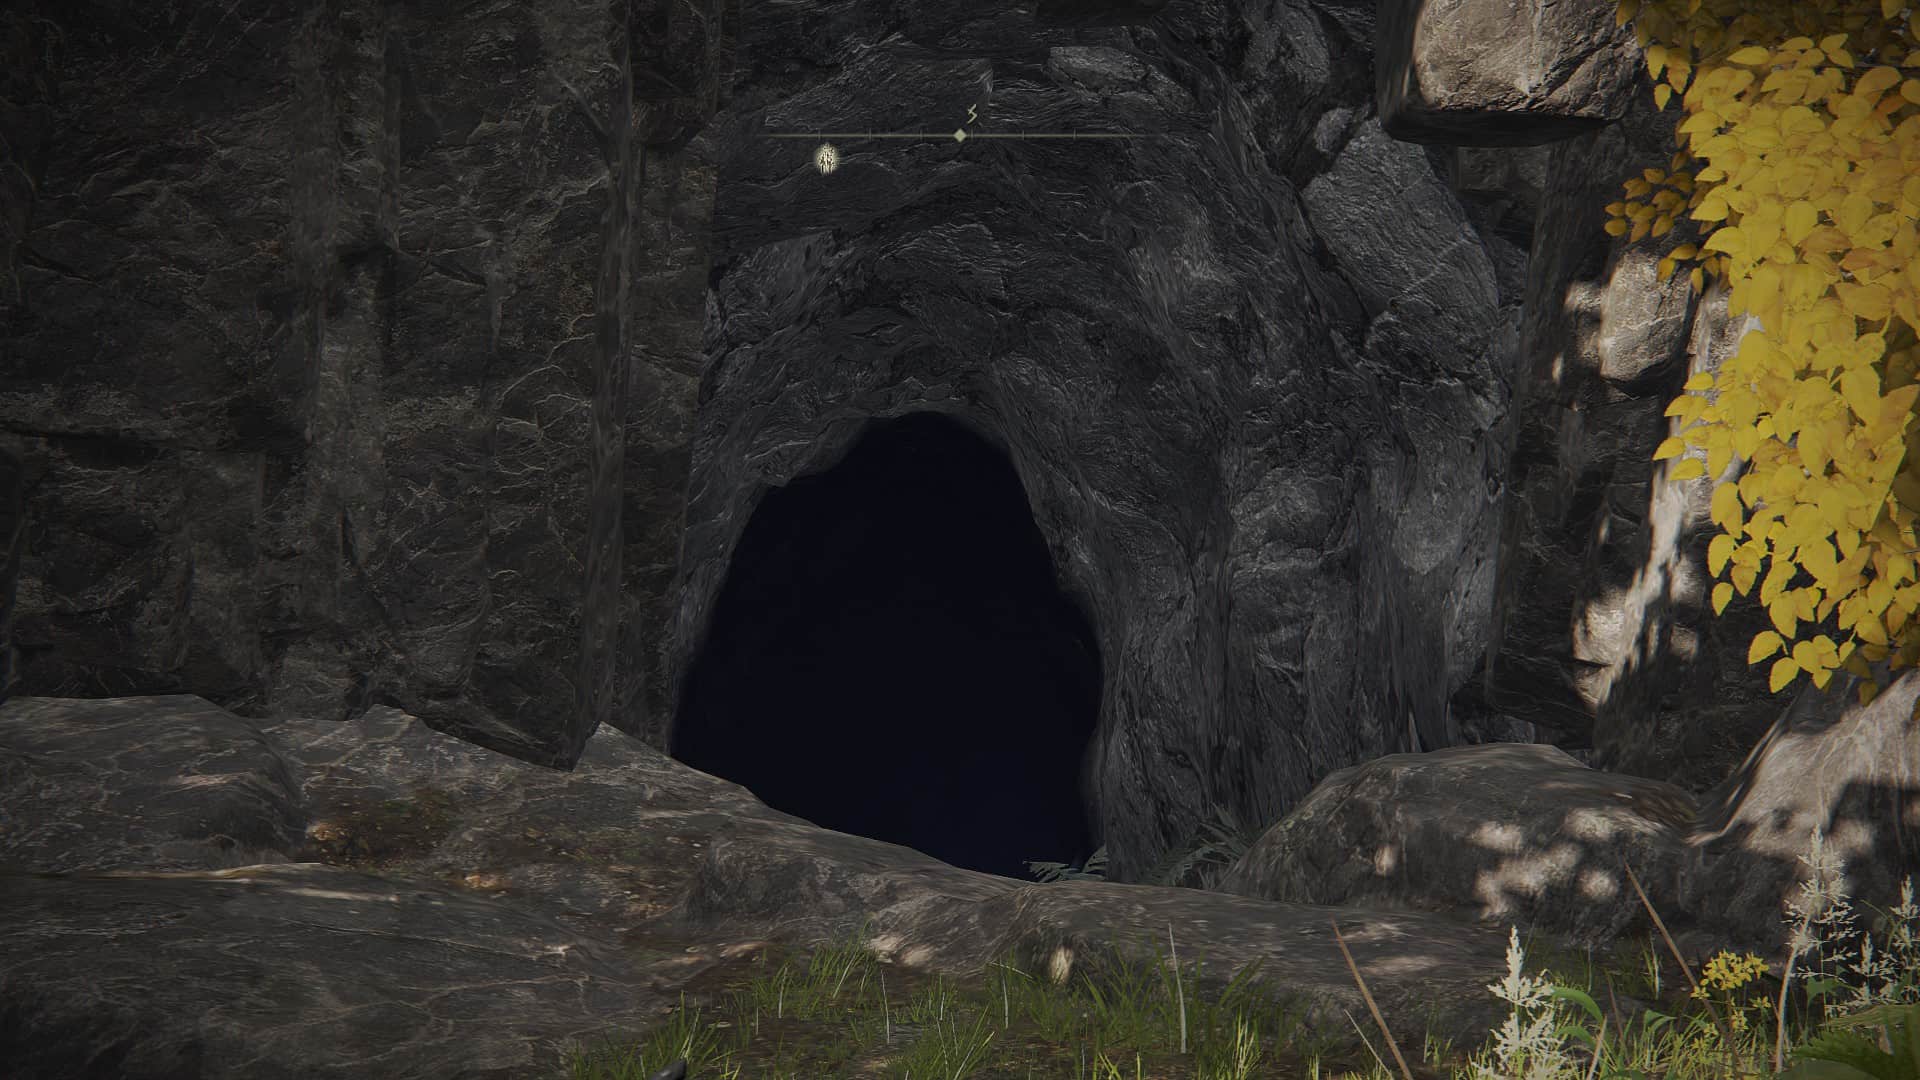 Elden Ring Lakeside Crystal Cave guide